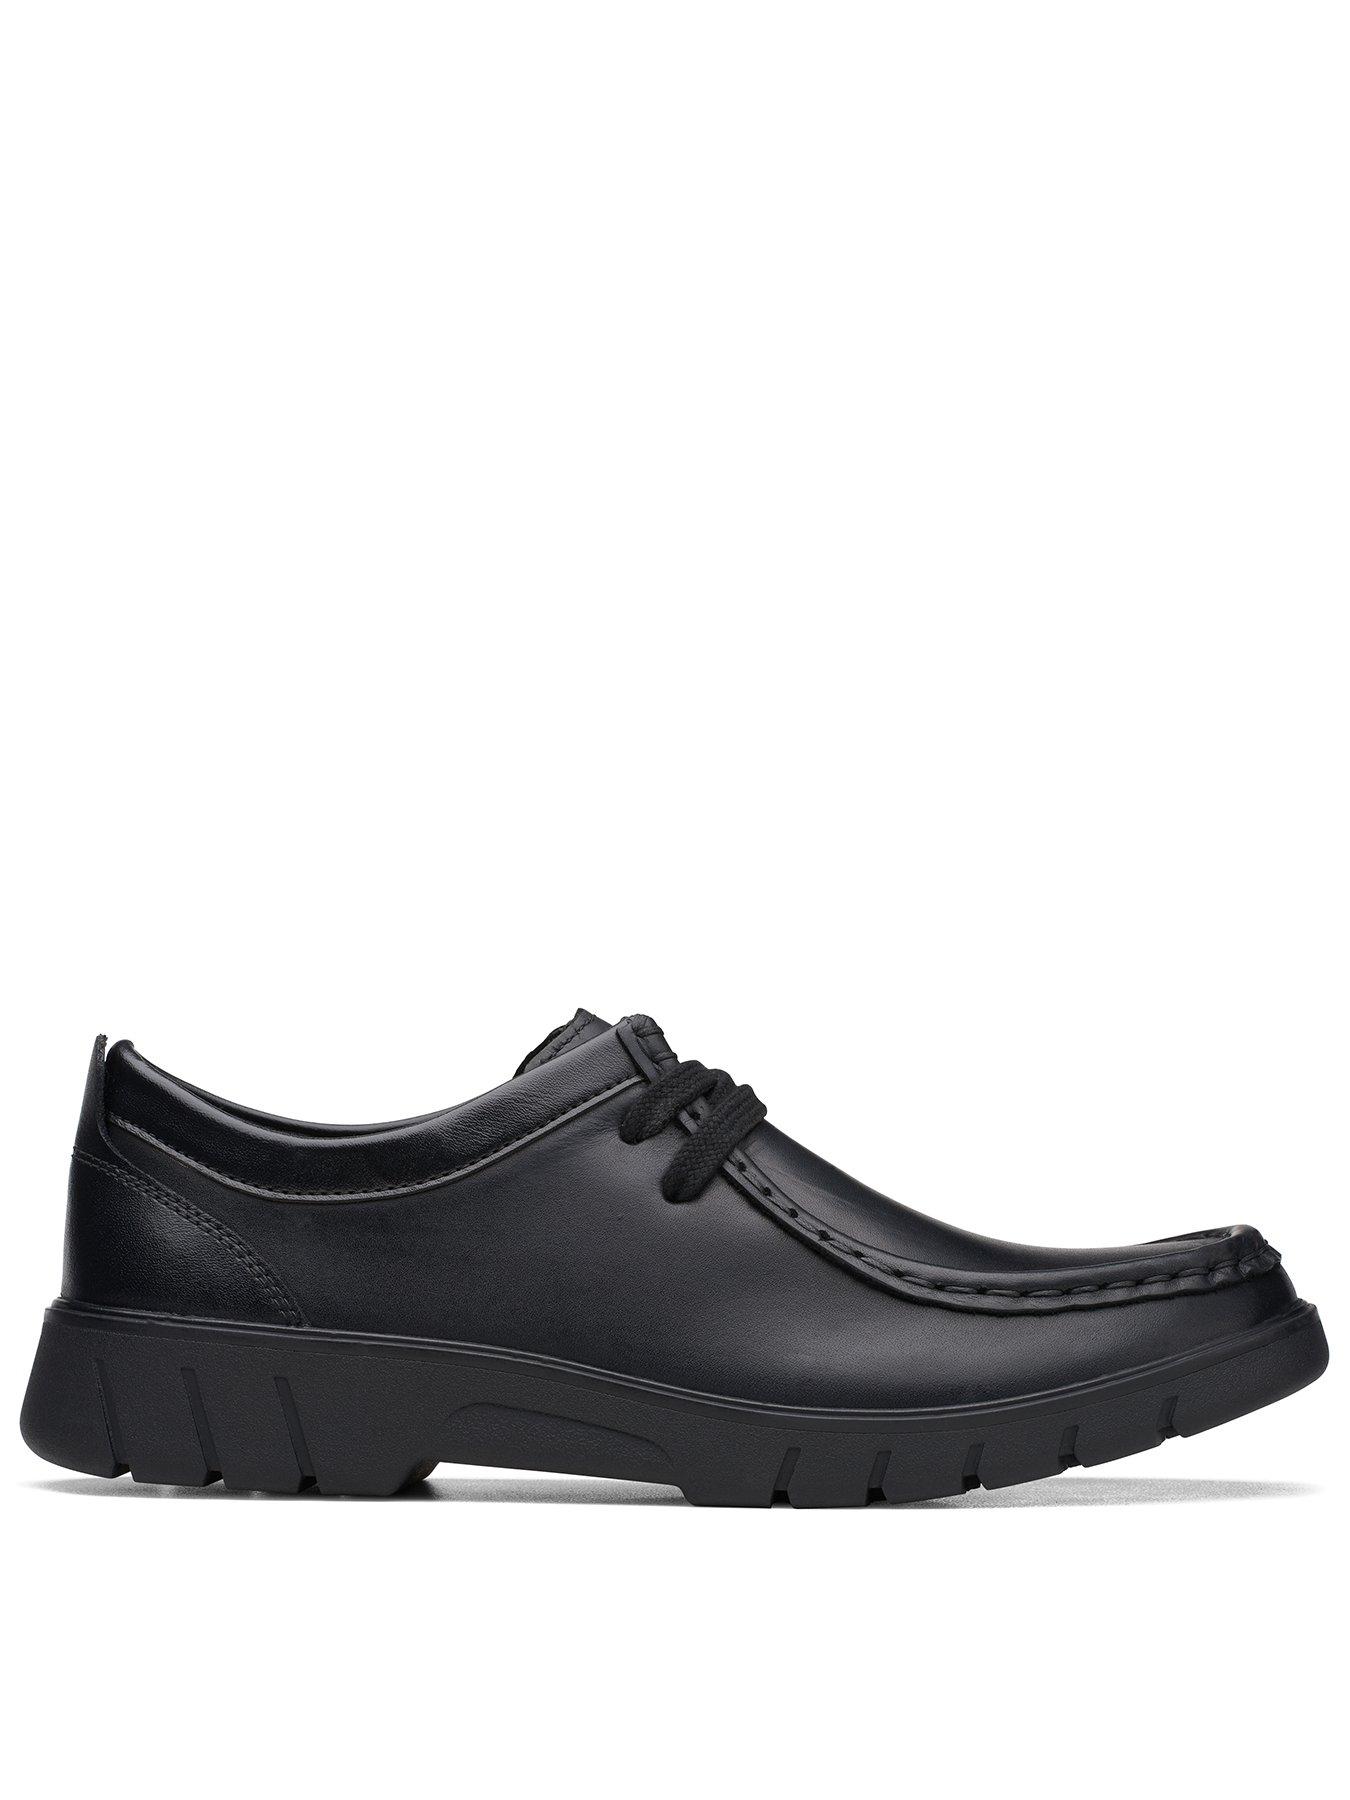 Clarks Youth Branch Low School Shoe - Black Leather | littlewoods.com